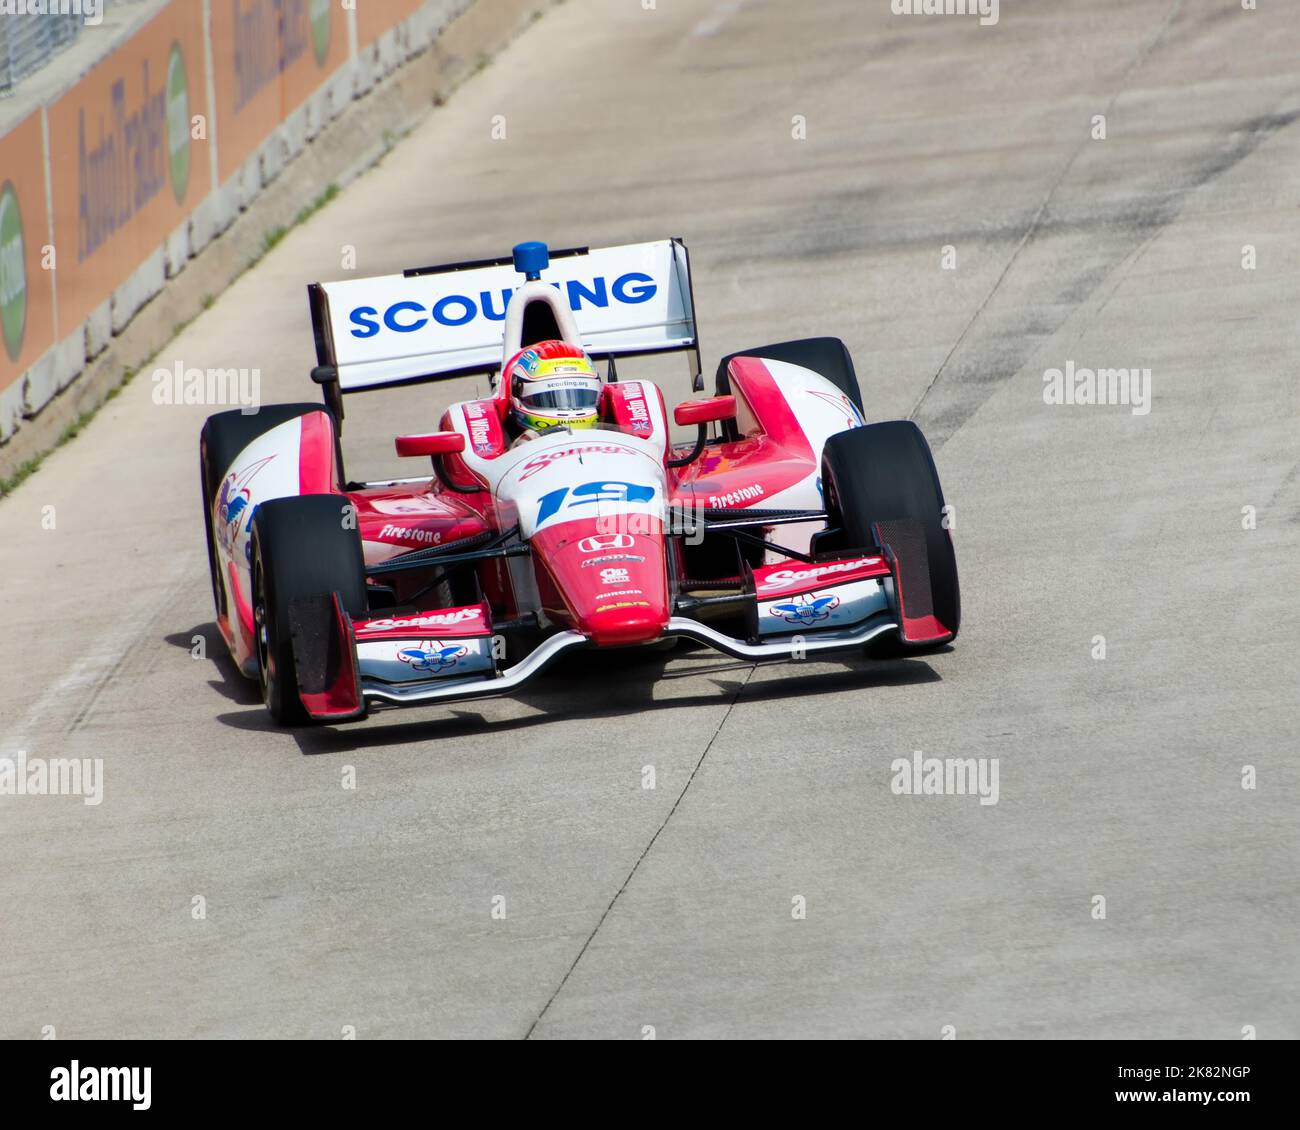 DETROIT, MI/USA - JUNE 1, 2013: Chevrolet Indy Dual in Detroit I. Third place Justin Wilson (#19), at speed. Sponsor: Boy Scouts of America Stock Photo